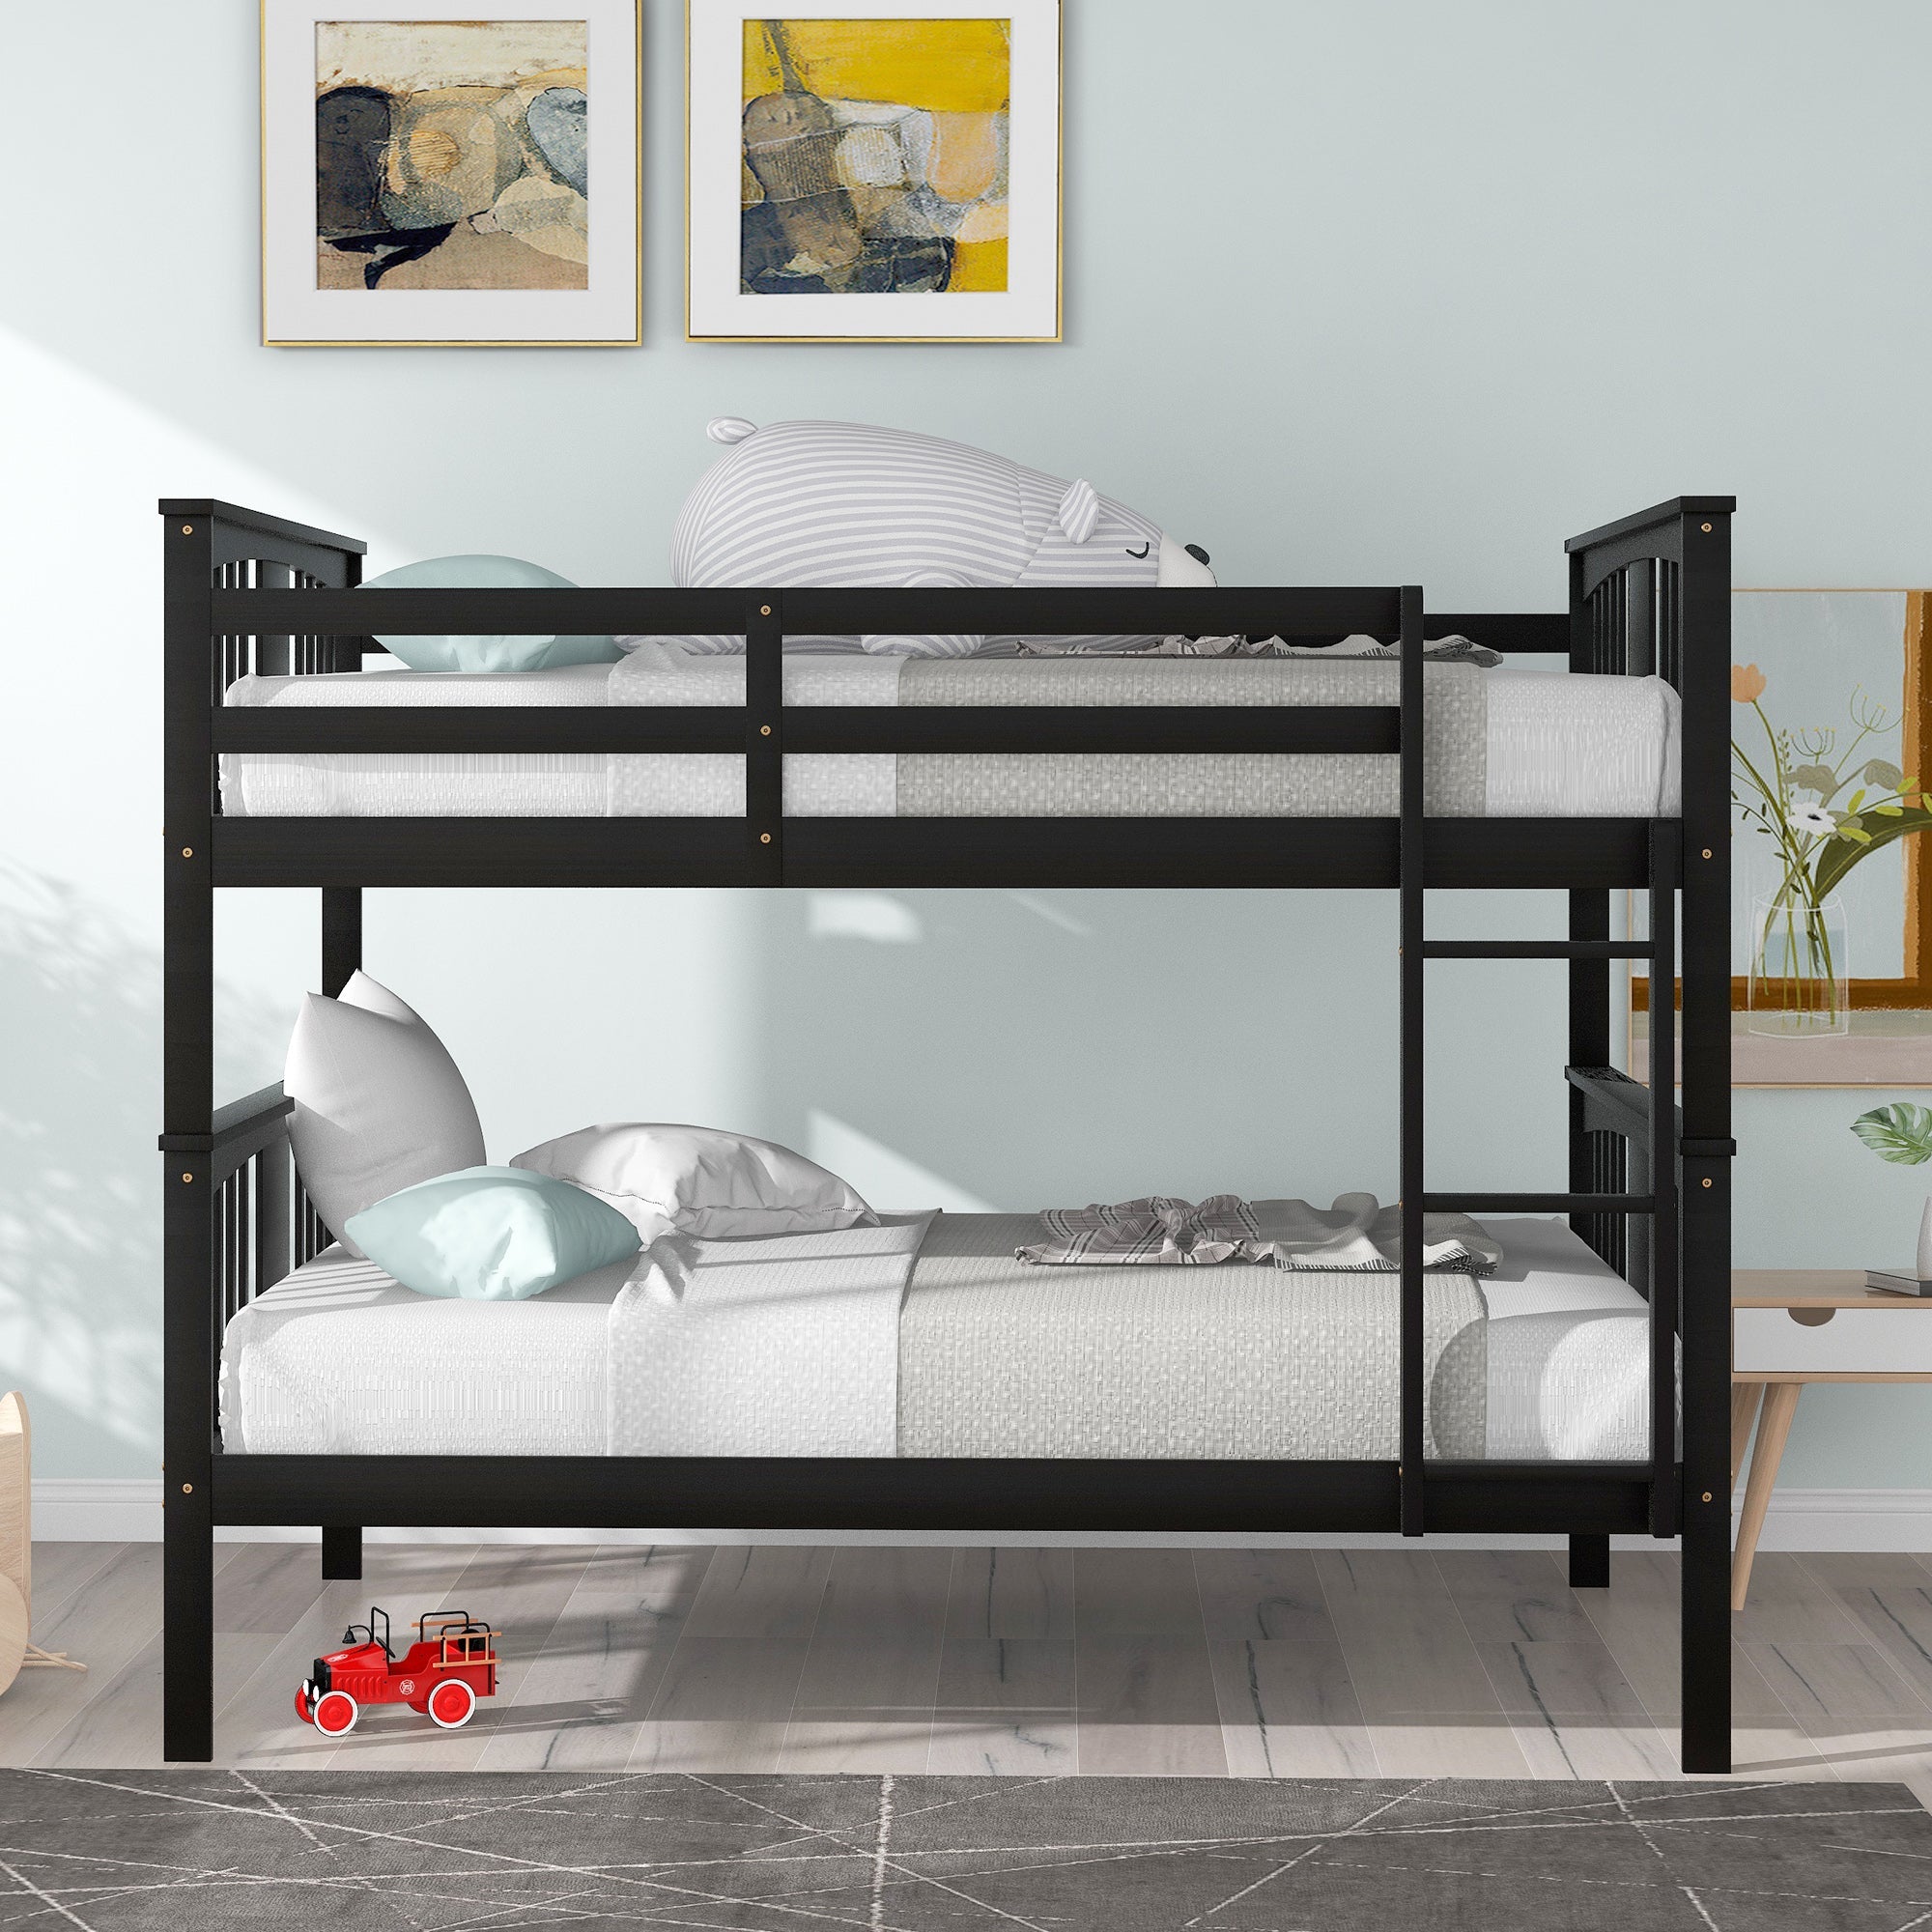 Churanty Wooden Full Over Full Bunk Bed with Safety Guardrail and Sturdy Ladder for Bedrooms Guest Rooms Dorms,Espresso